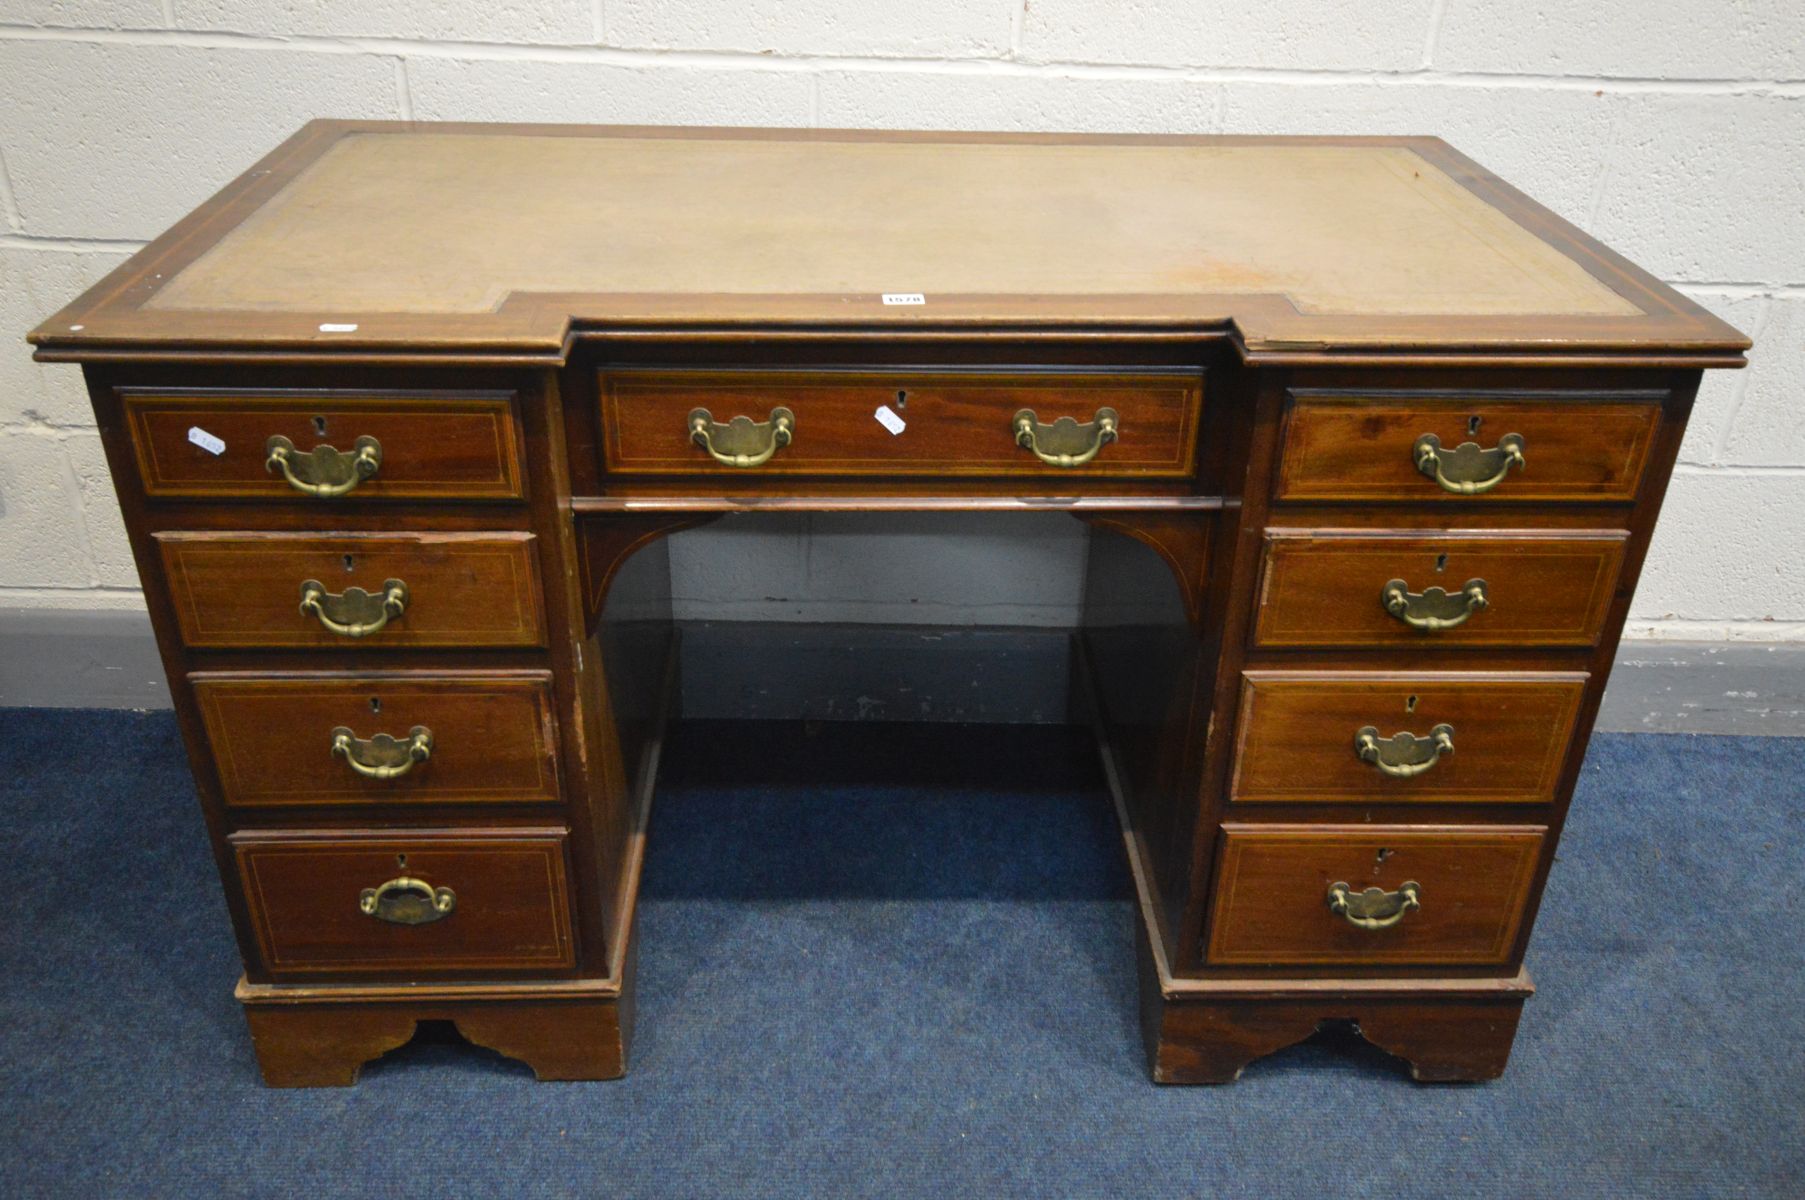 AN EDWARDIAN MAHOGANY AND BOX STRUNG INLAID INVERTED BREAKFRONT KNEEHOLE DESK, with a brown